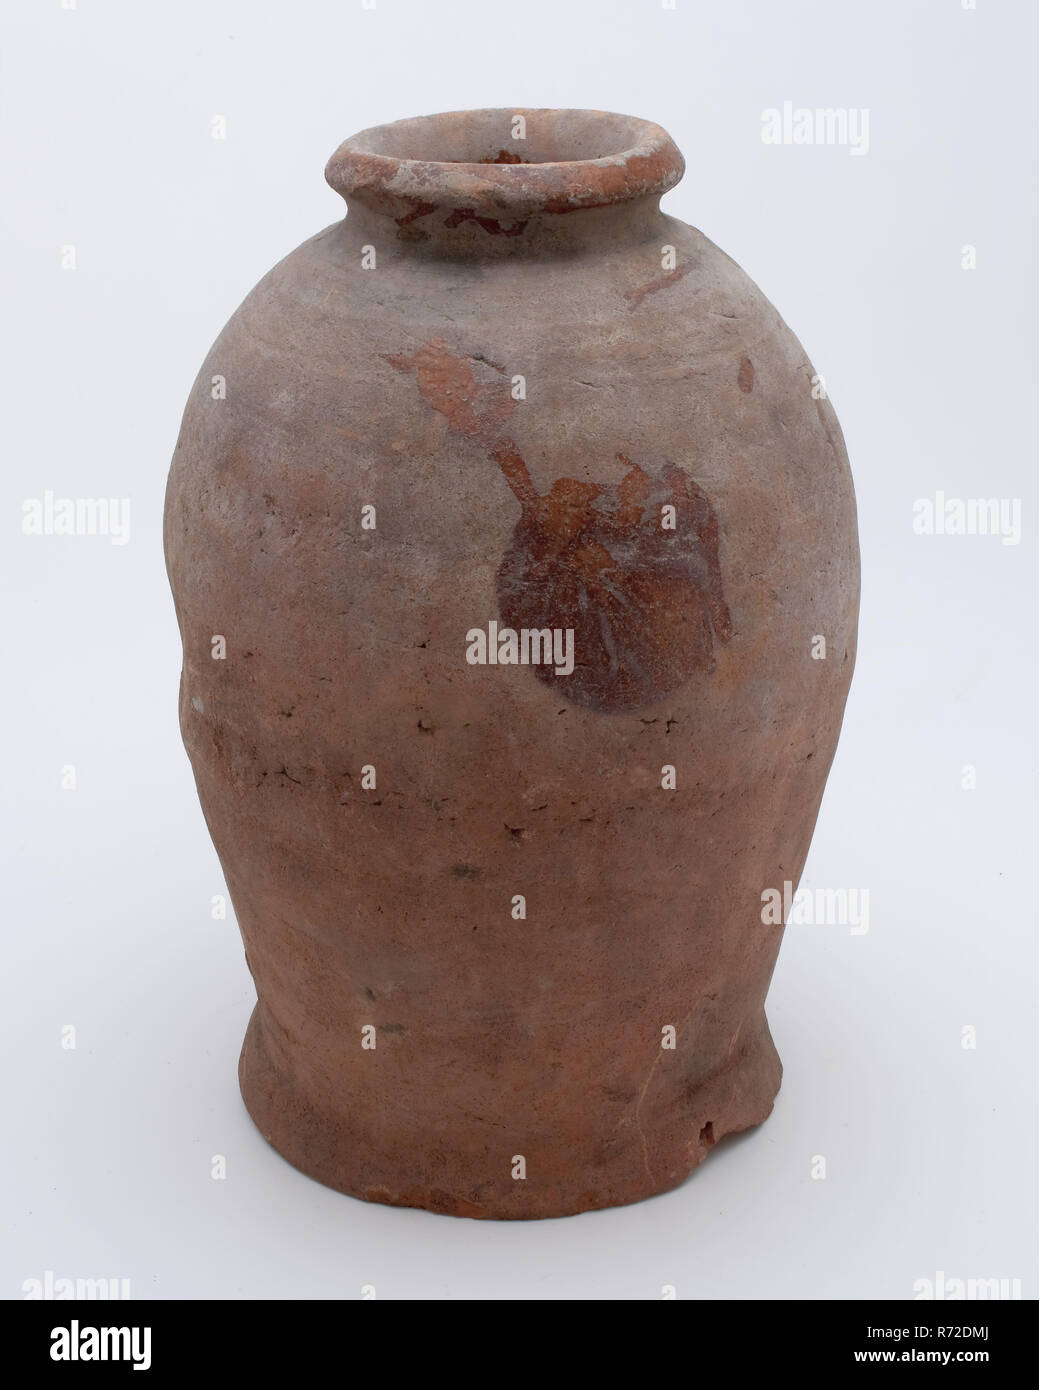 Pottery pot on stand, baluster shape, used in the sugar industry, sugar bowl pot holder soil find ceramic earthenware glaze lead glaze, hand turned glazed earthenware pot on stand. Baluster shape with round shoulder and narrow neck opening Thick and rounded neckline including waistline. Red shard internally glazed Blurred spinning of the entire height and shallow dent in the sidewall under the arch archeology indigenous pottery sugar sugar industry confectionery Stock Photo